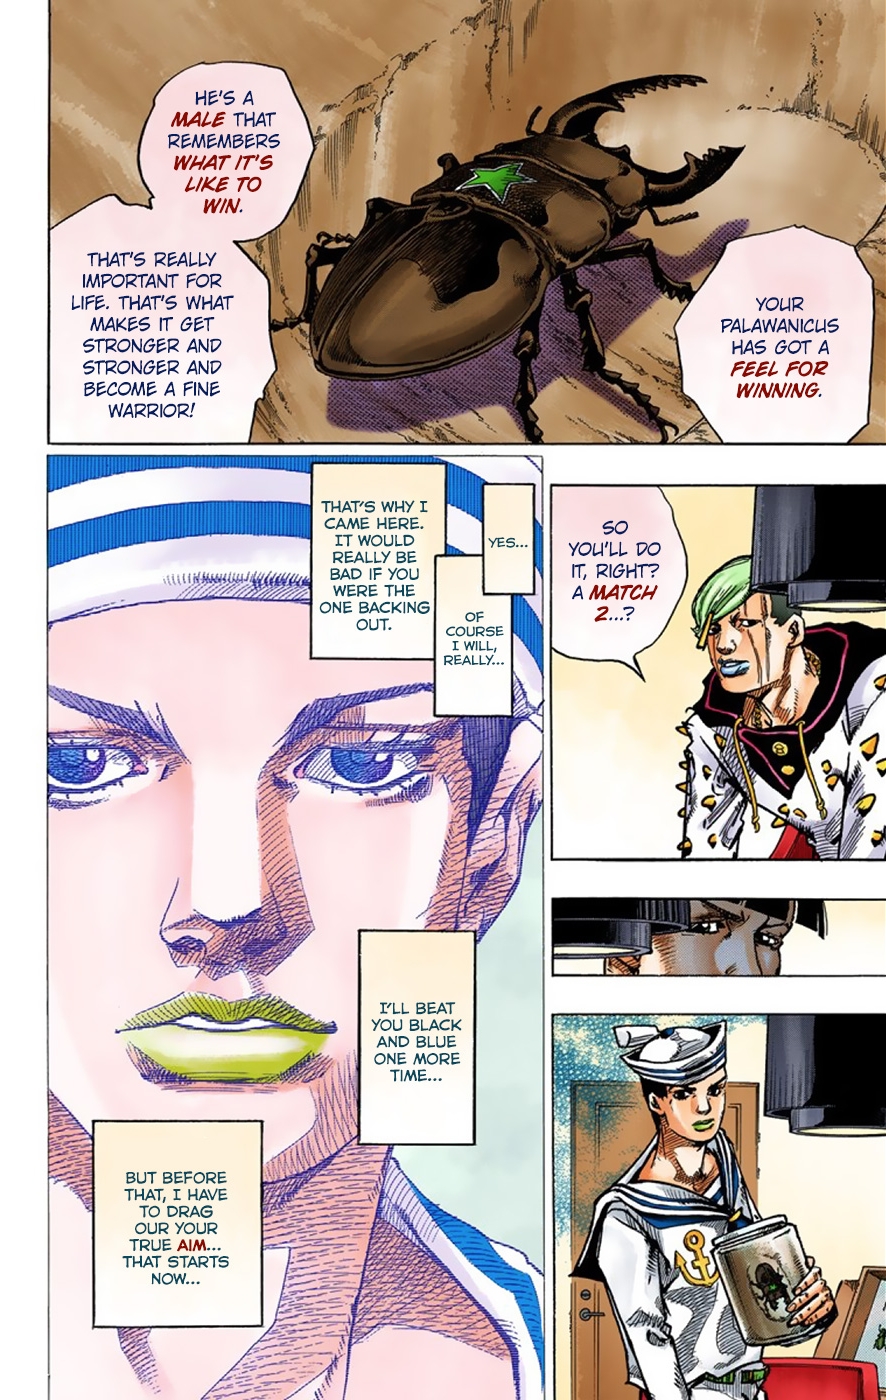 JoJo's Bizarre Adventure Part 8 JoJolion [Official Colored] Vol. 9 Ch. 36 Every Day is a Summer Vacation Part 3